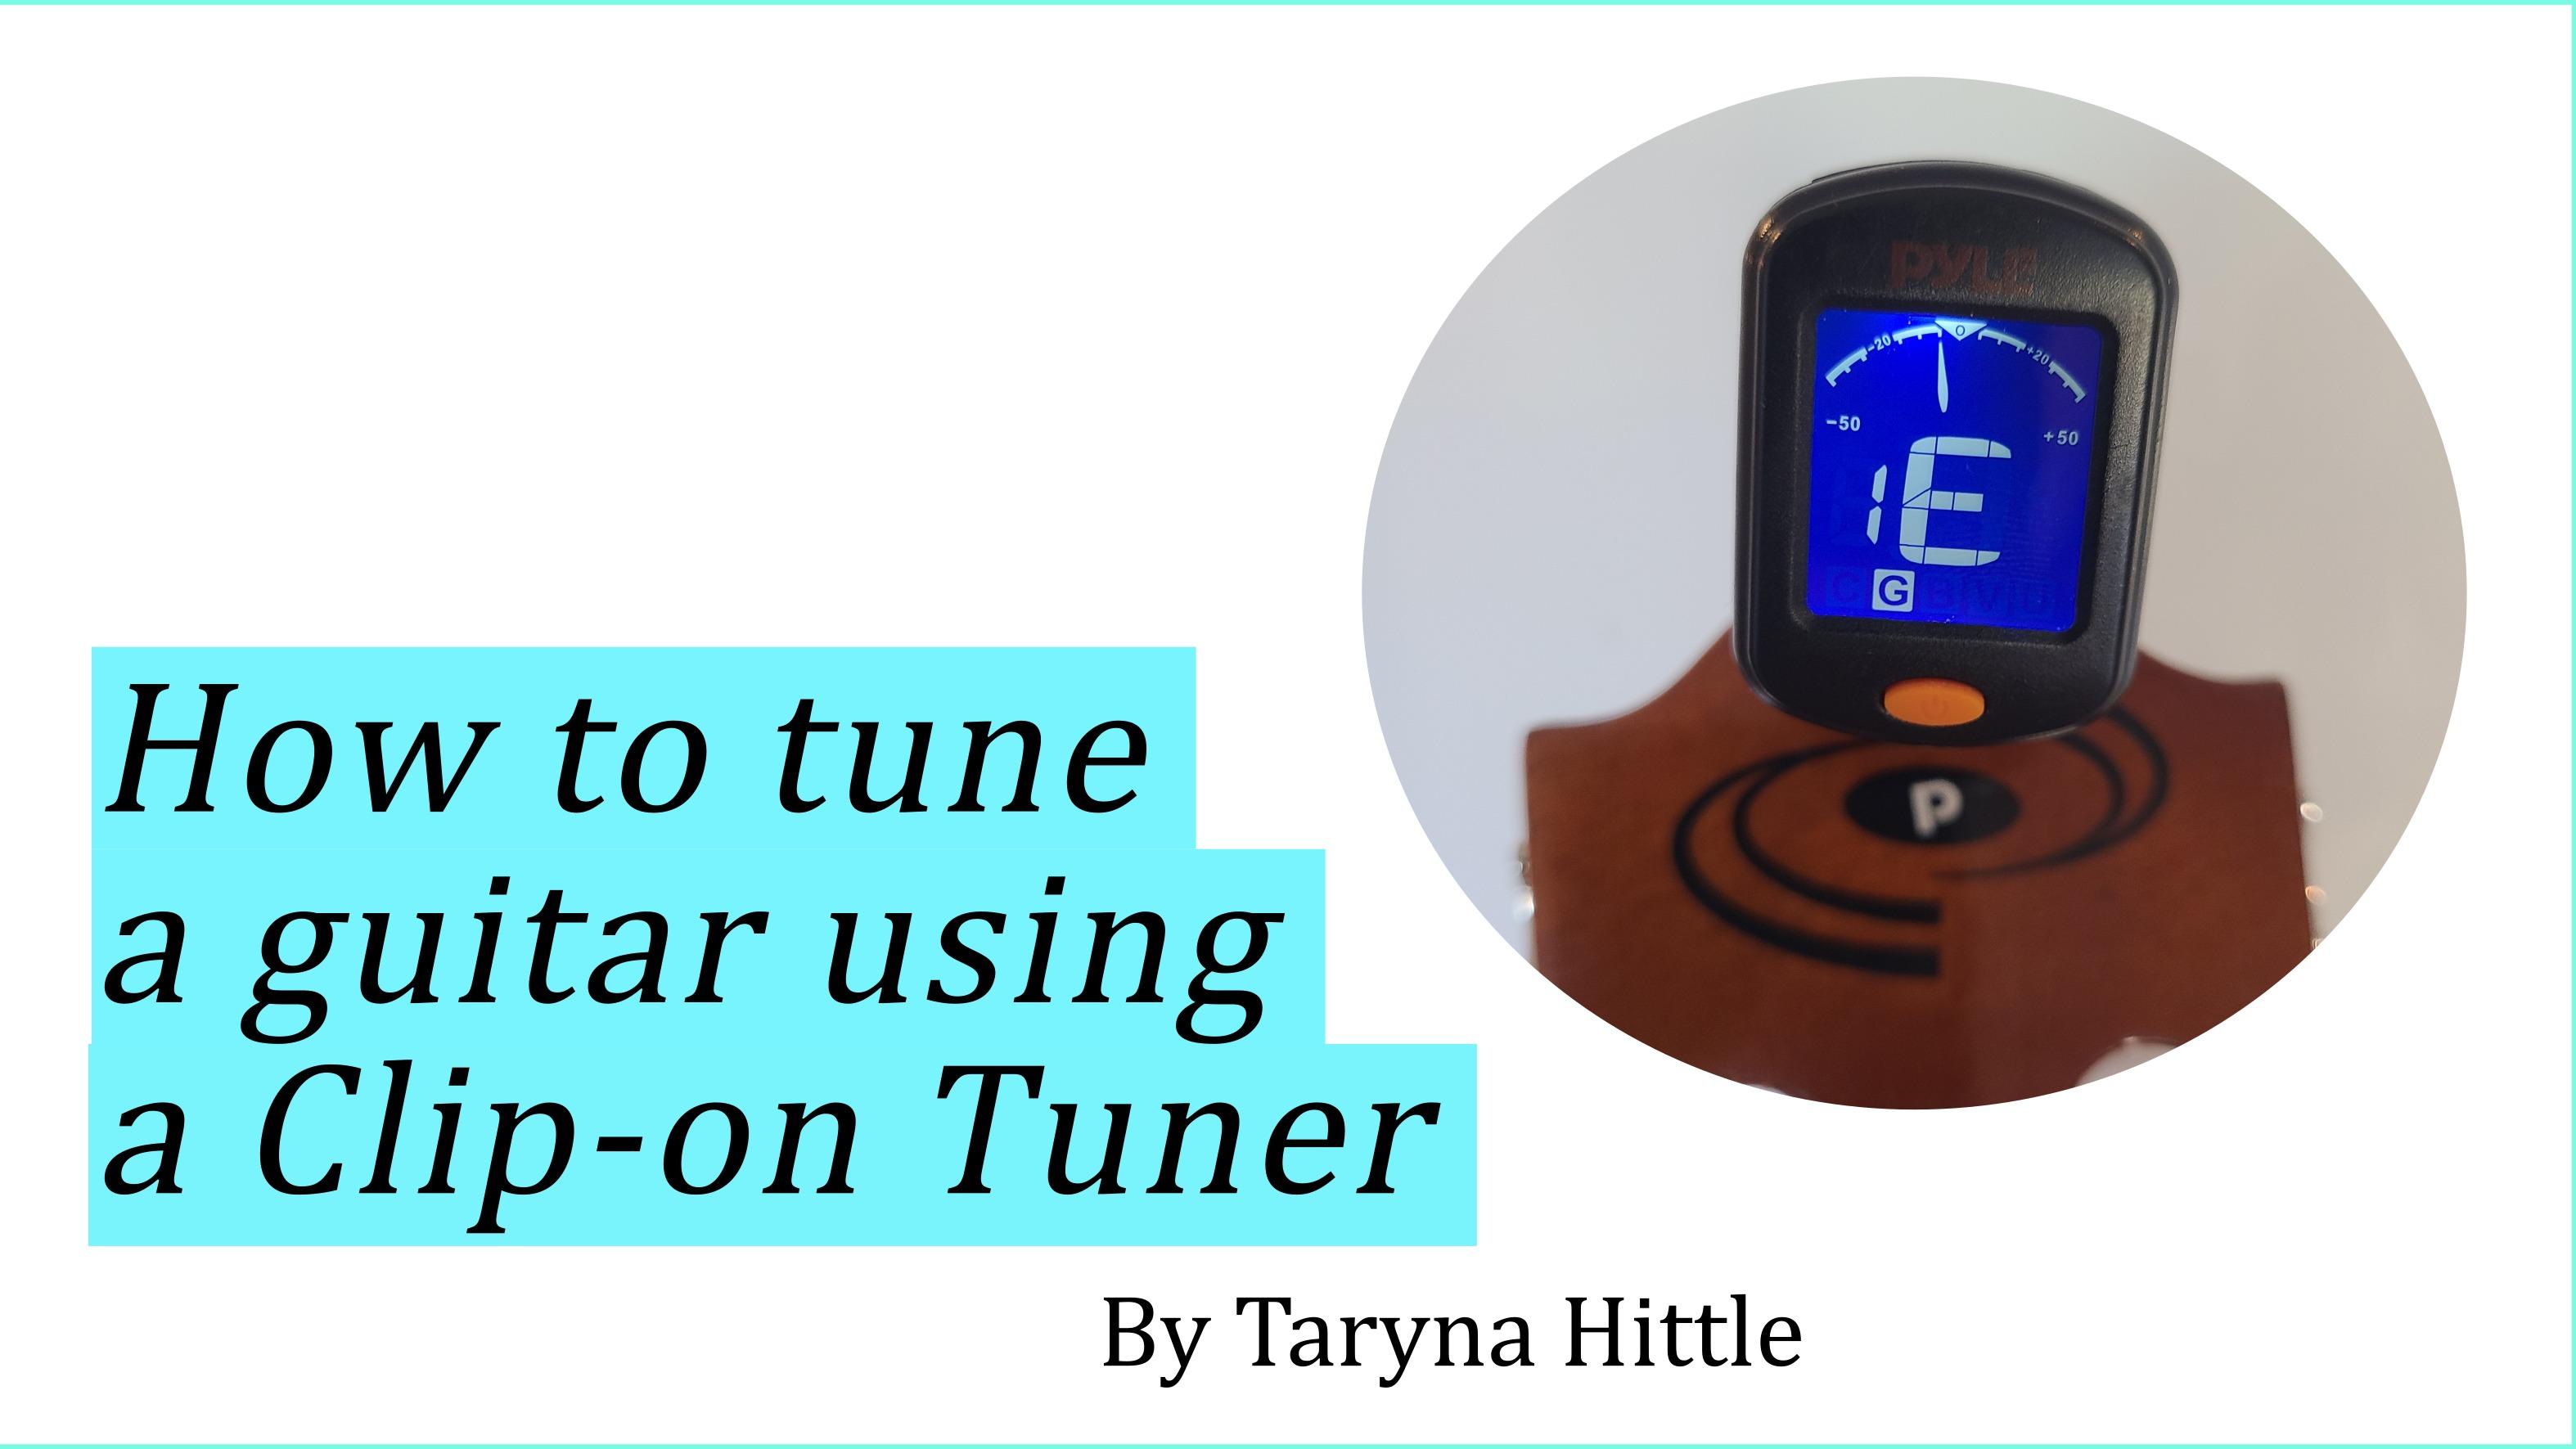 How to tune your Guitar using a Clip-on Tuner